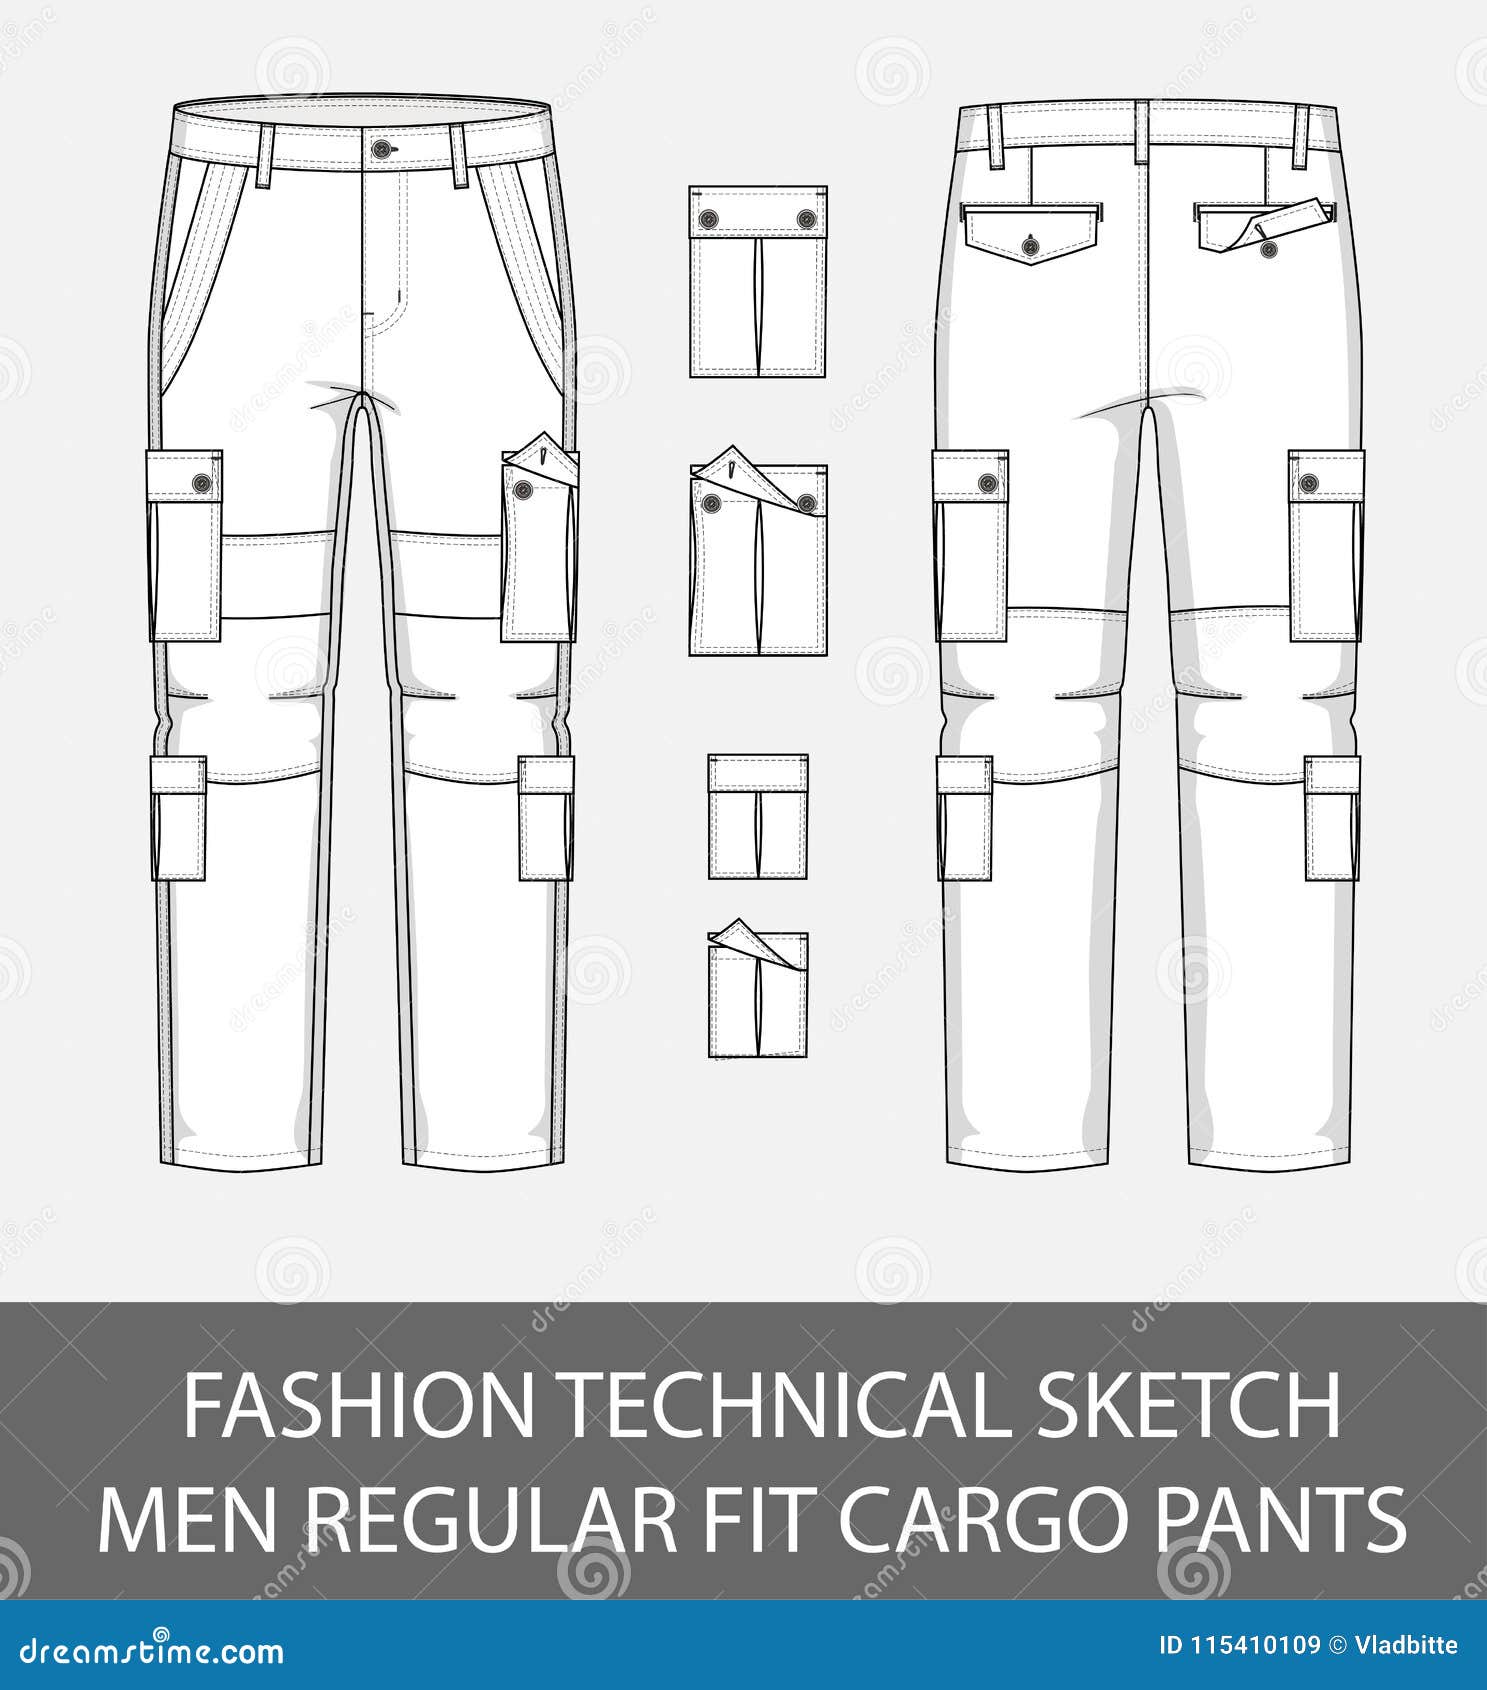 How to draw pants sketch in Illustrator for Fashion Design - YouTube